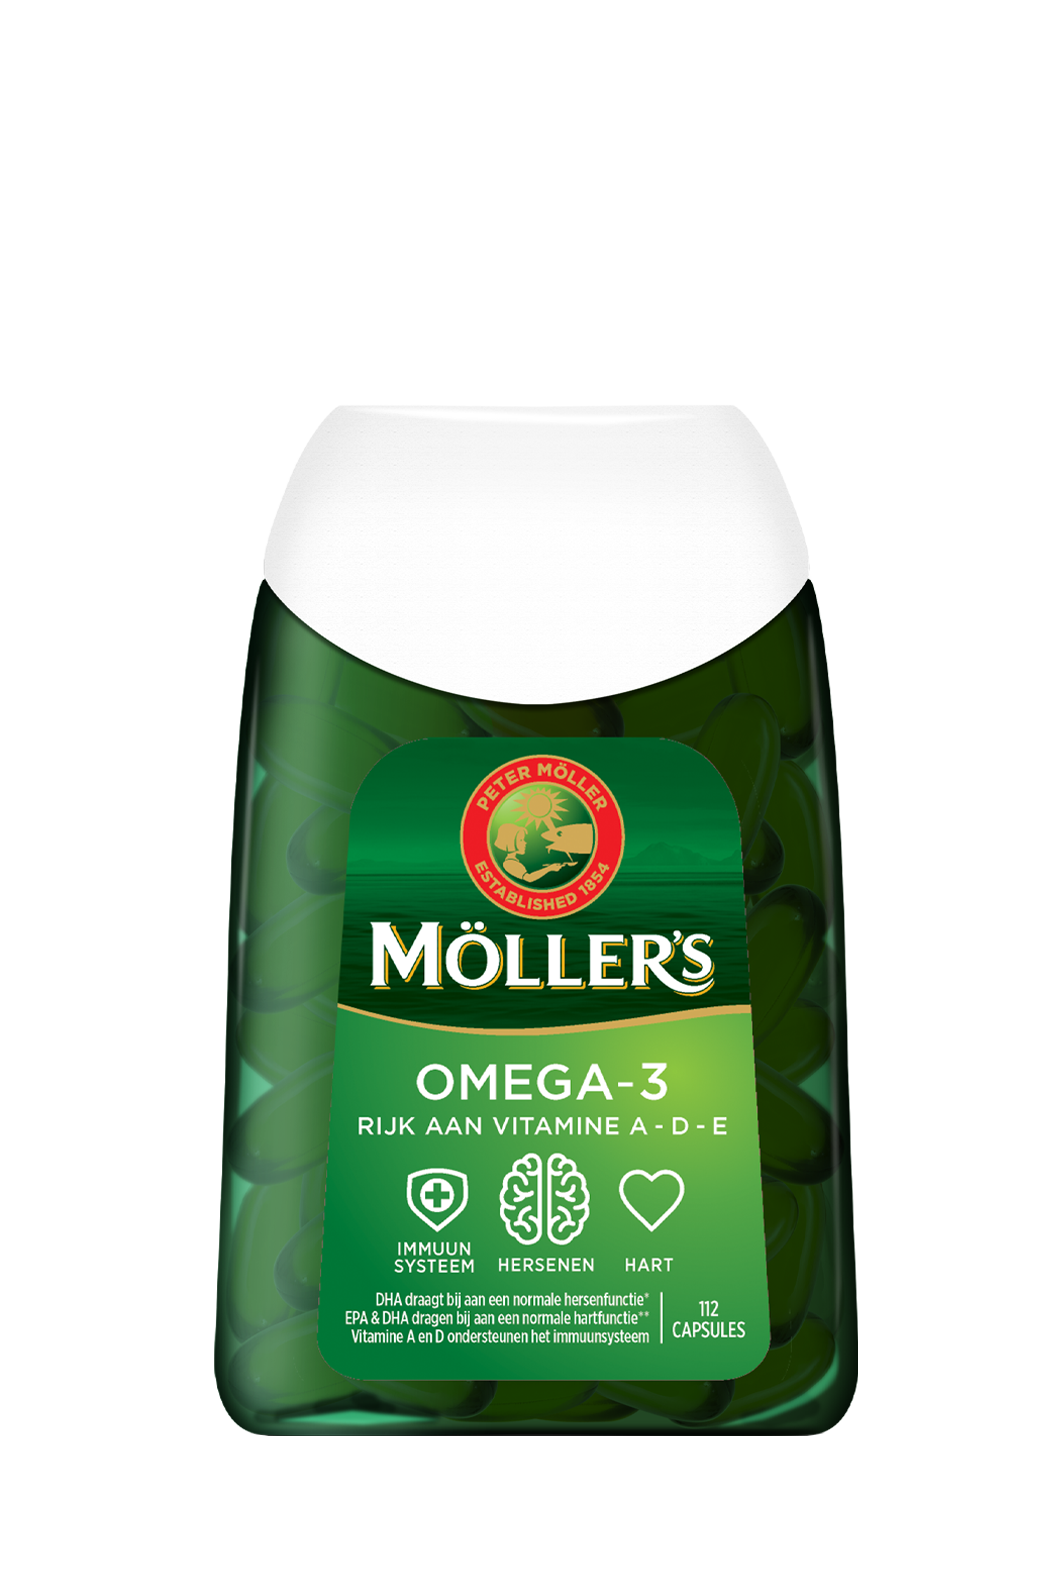 Möller's Omega-3 Cod Liver Oil Natural - Fish oil with vitamin D